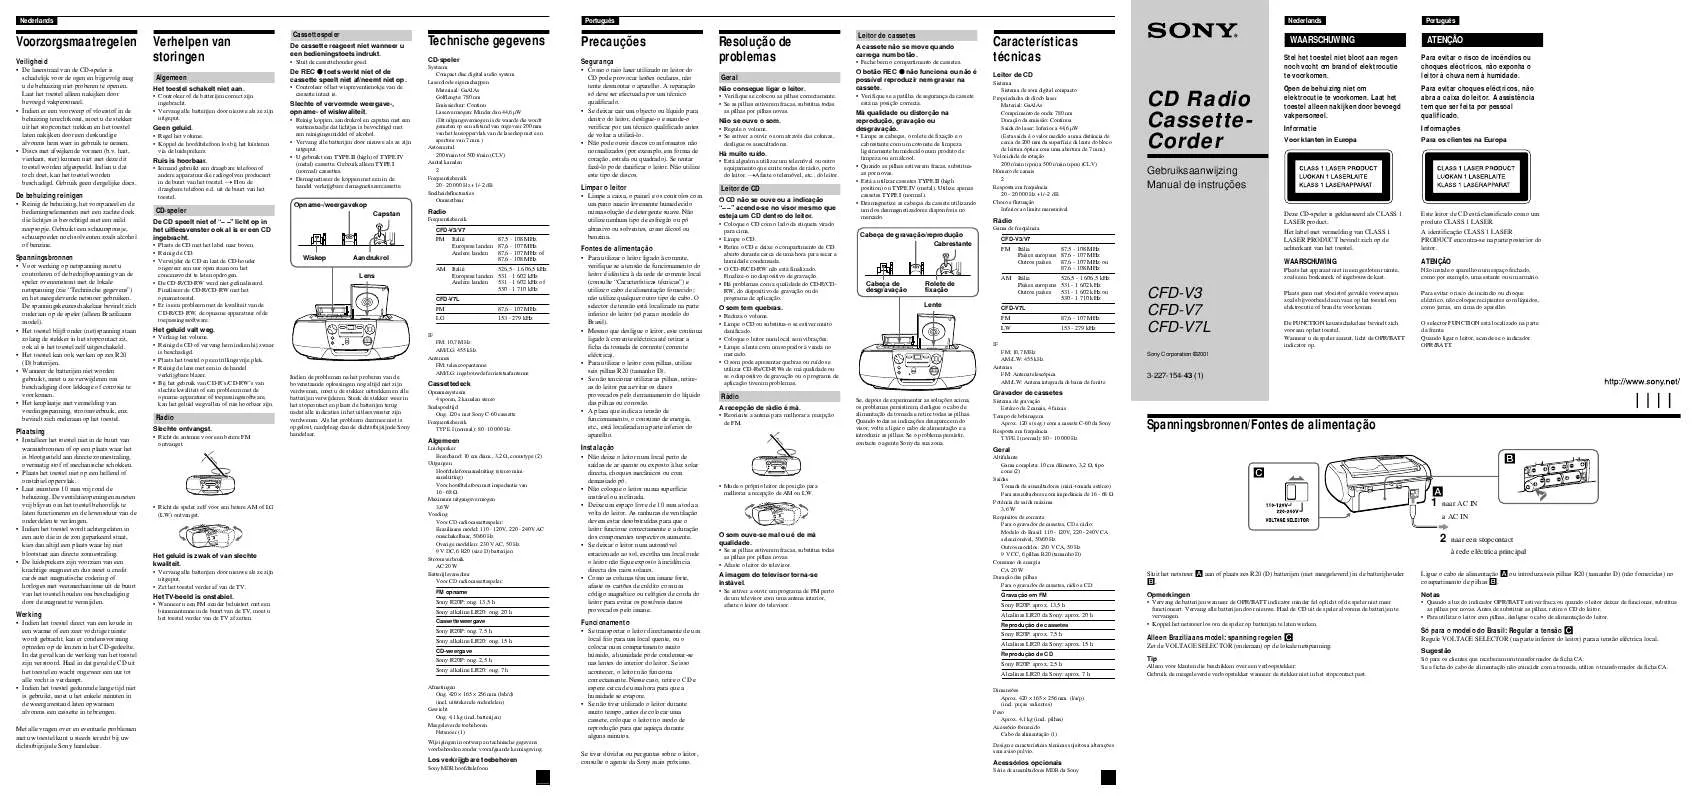 Mode d'emploi SONY CFD-V7L